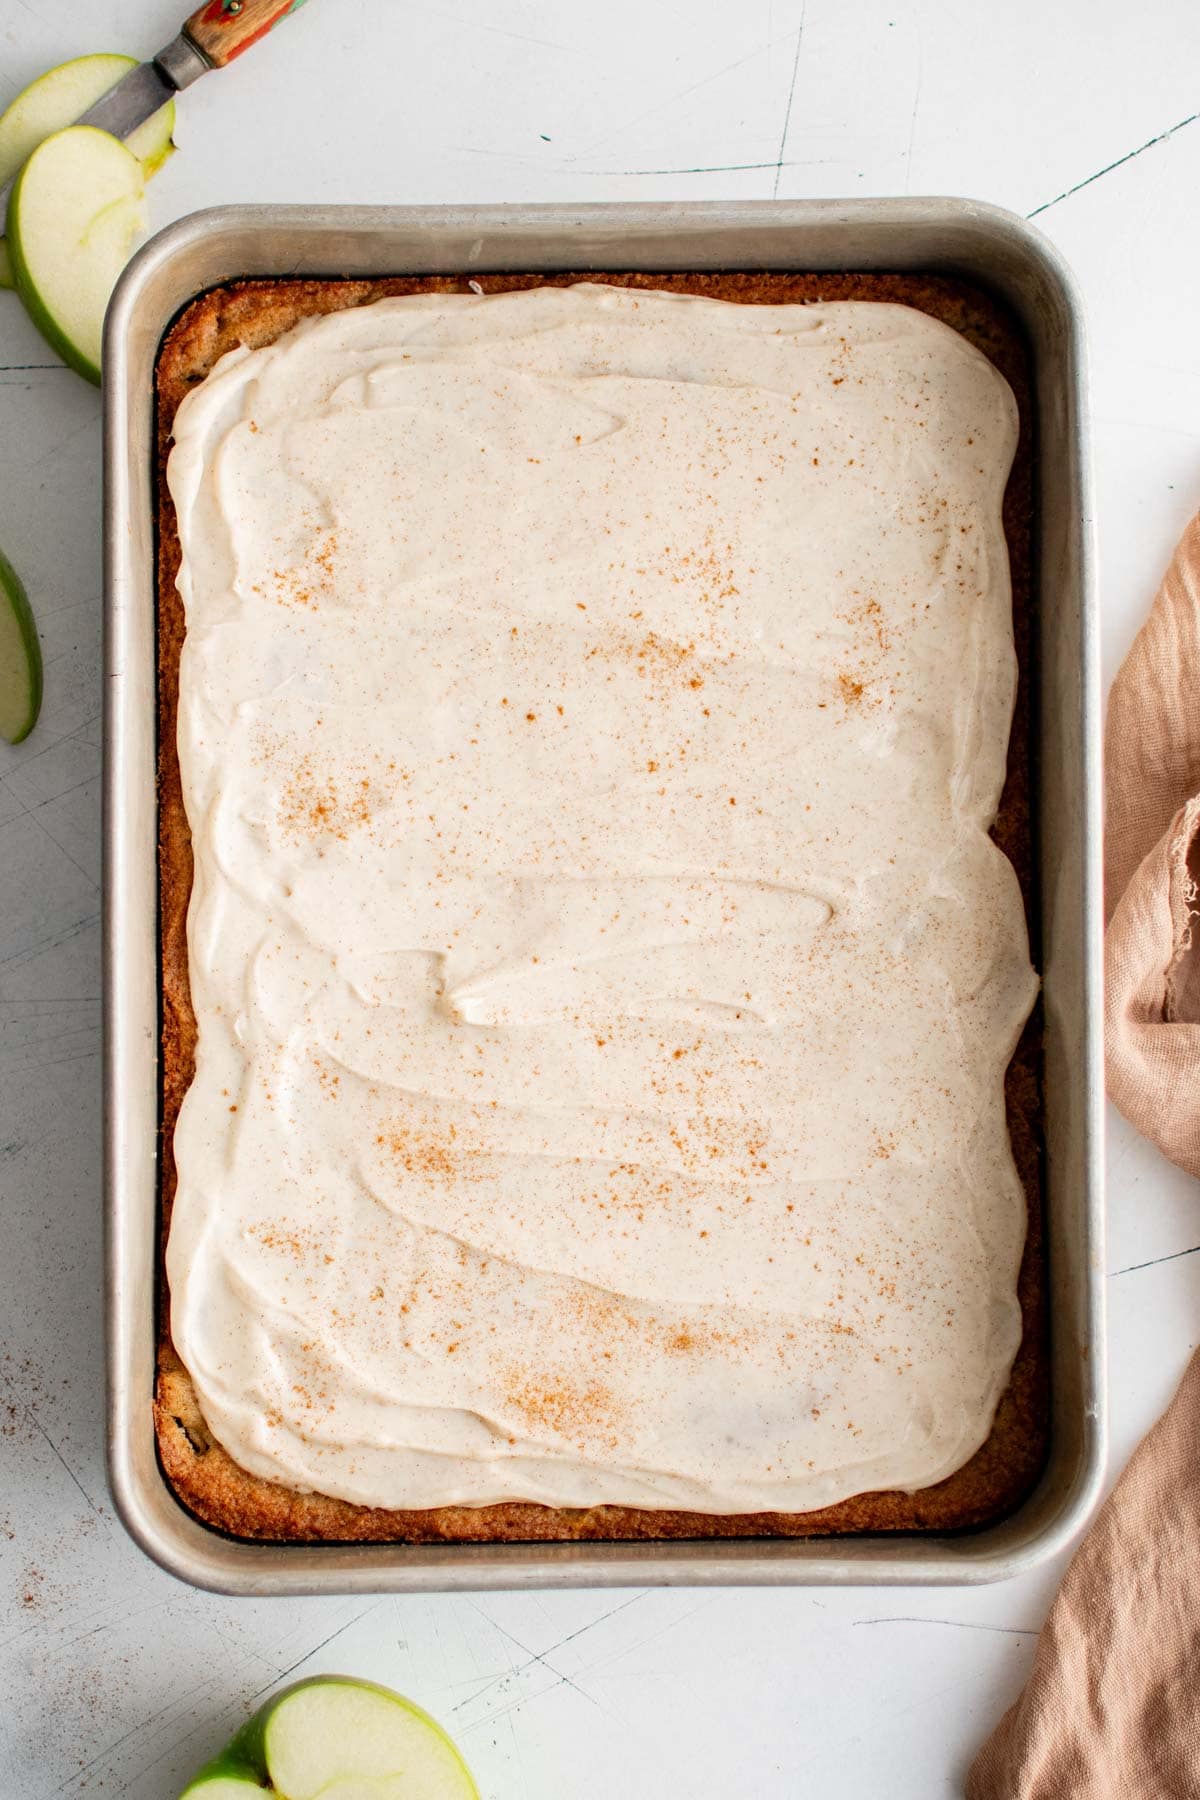 Apple cake with white frosting in a cake pan.